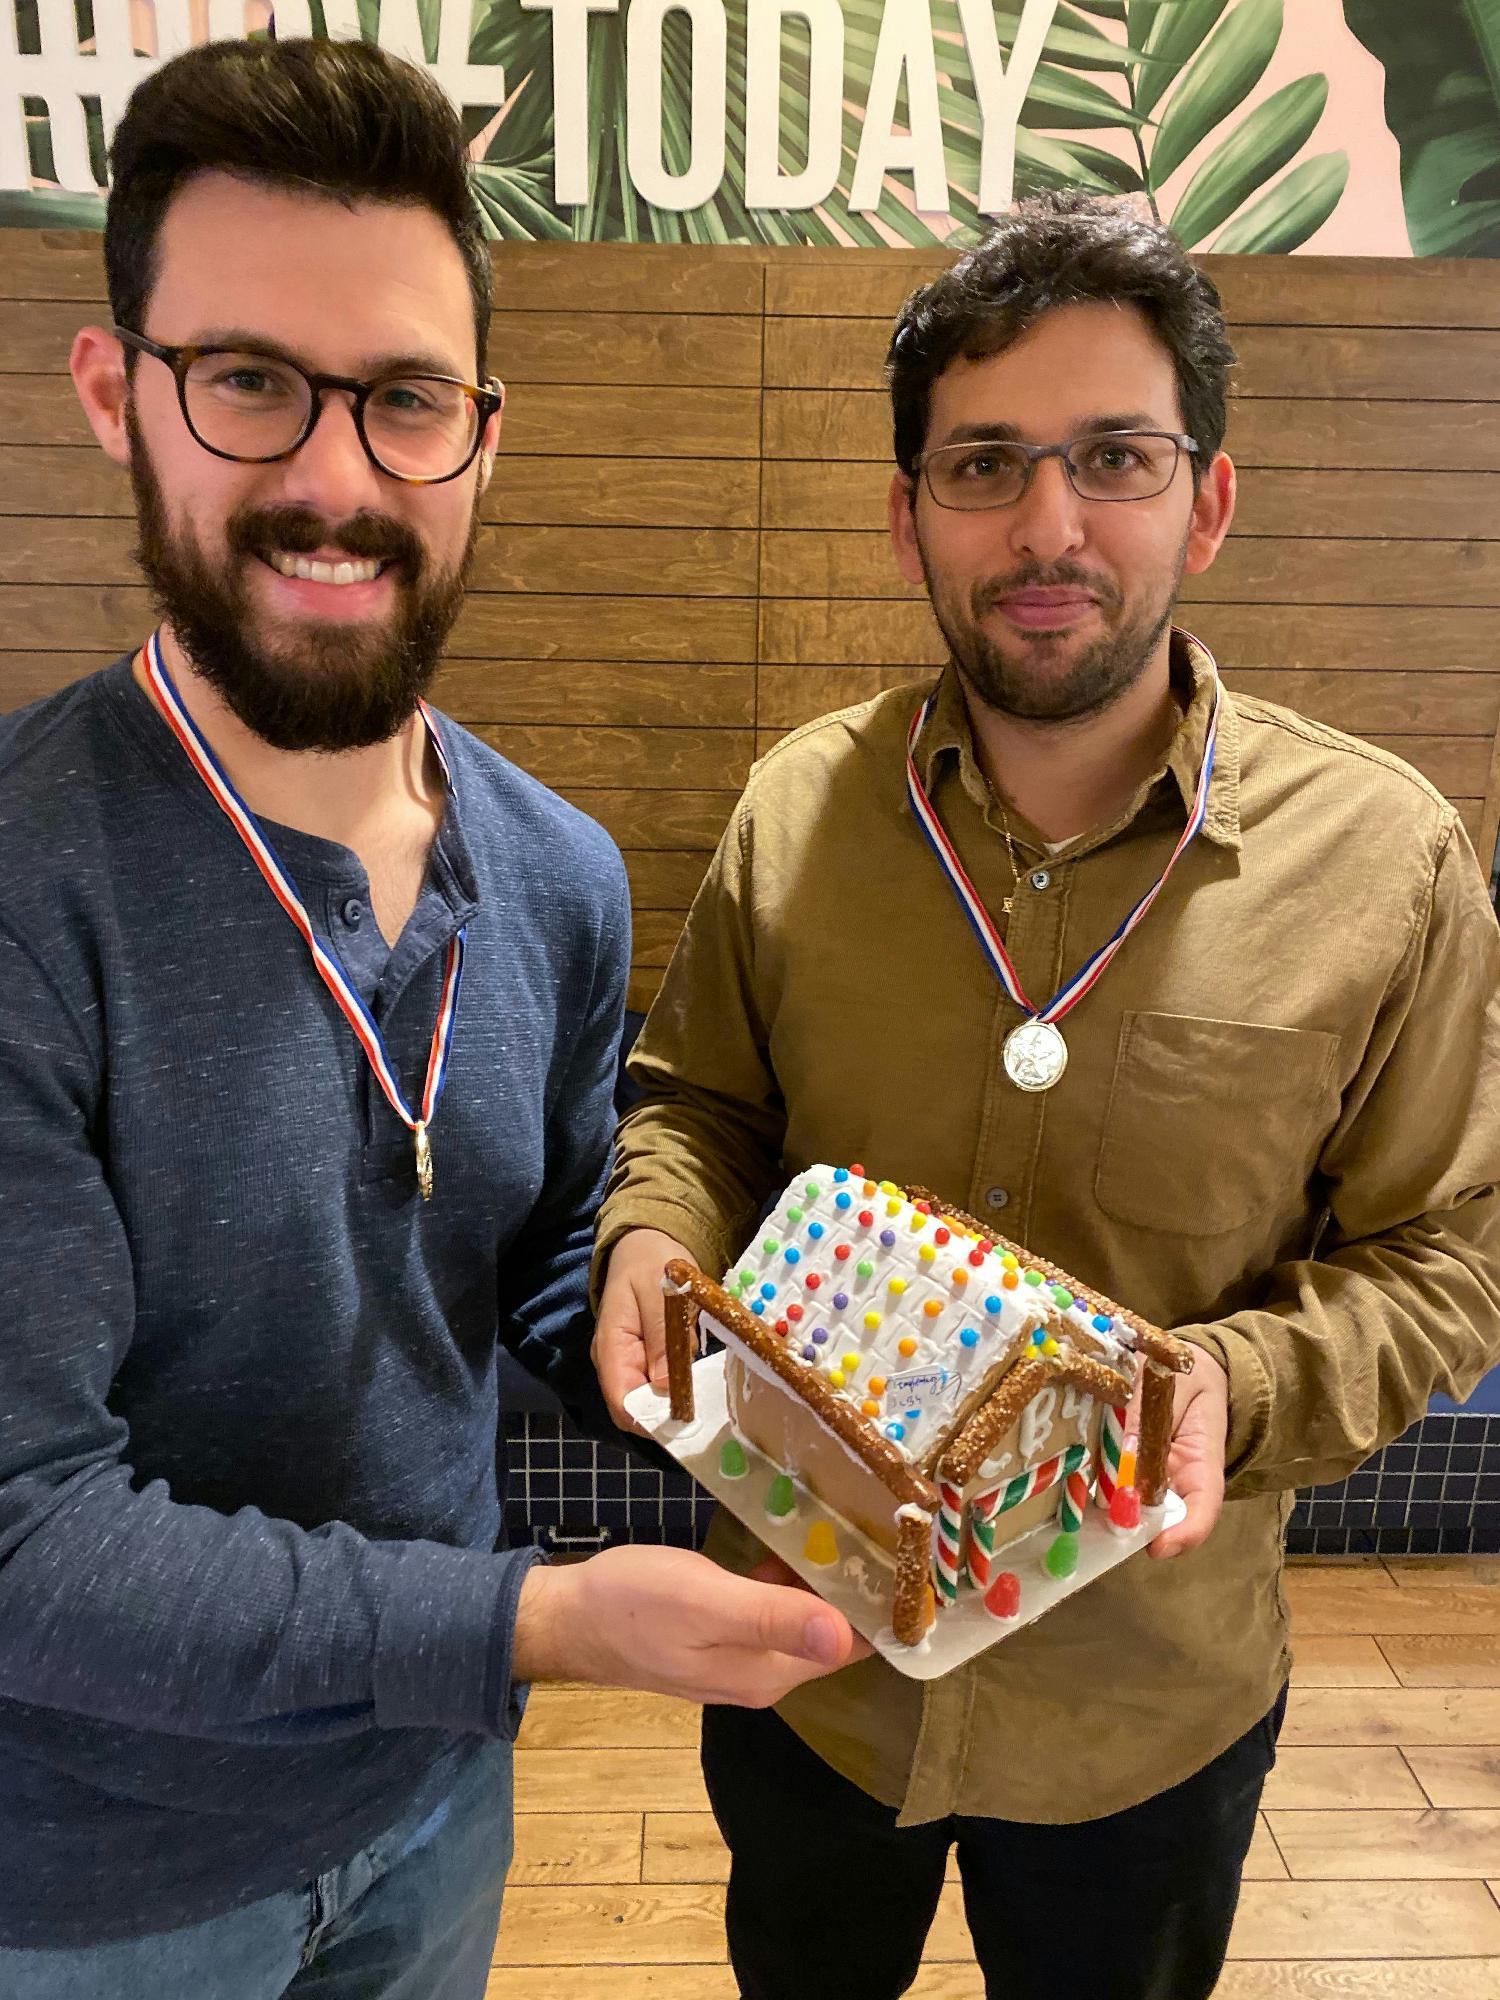 Meet Ben and Morris, the gold medal winners of CB4's gingerbread house competition